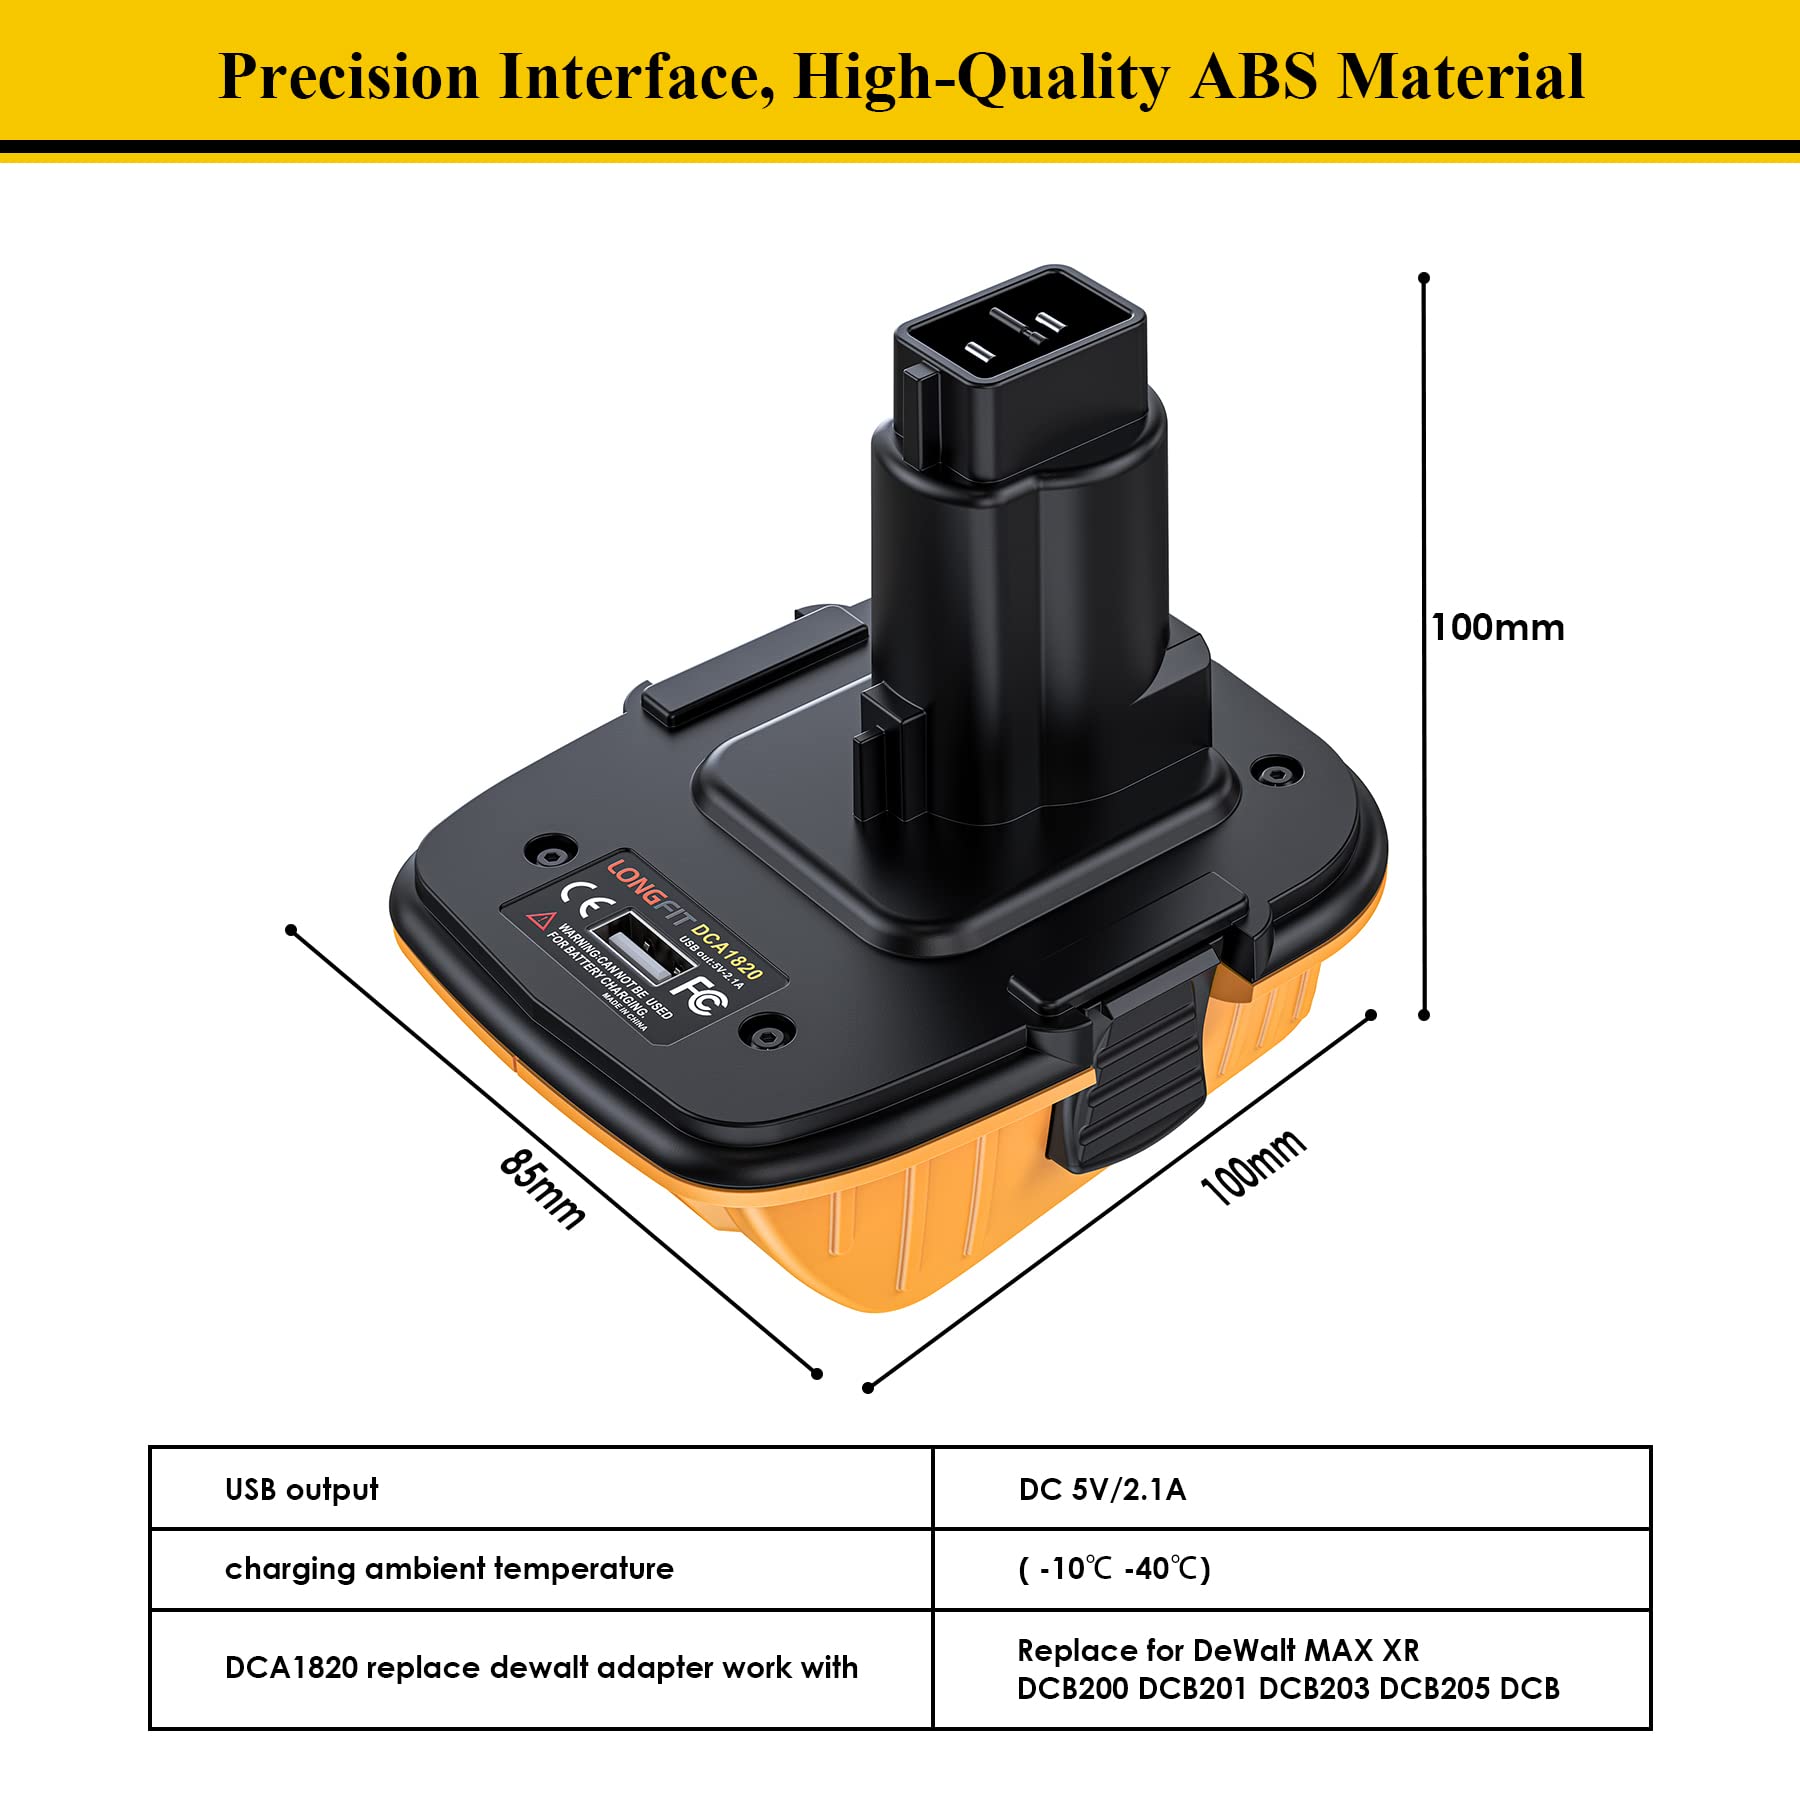 Replace for DeWalt Battery Adapter 18V to 20V DCA1820, Convert 20V Lithium Battery to 18V NiCad & NiMh Battery DC9096 DC9098 DC9099 DW9098 DW9096, with 5V USB Port, for Drills, Sanders and More